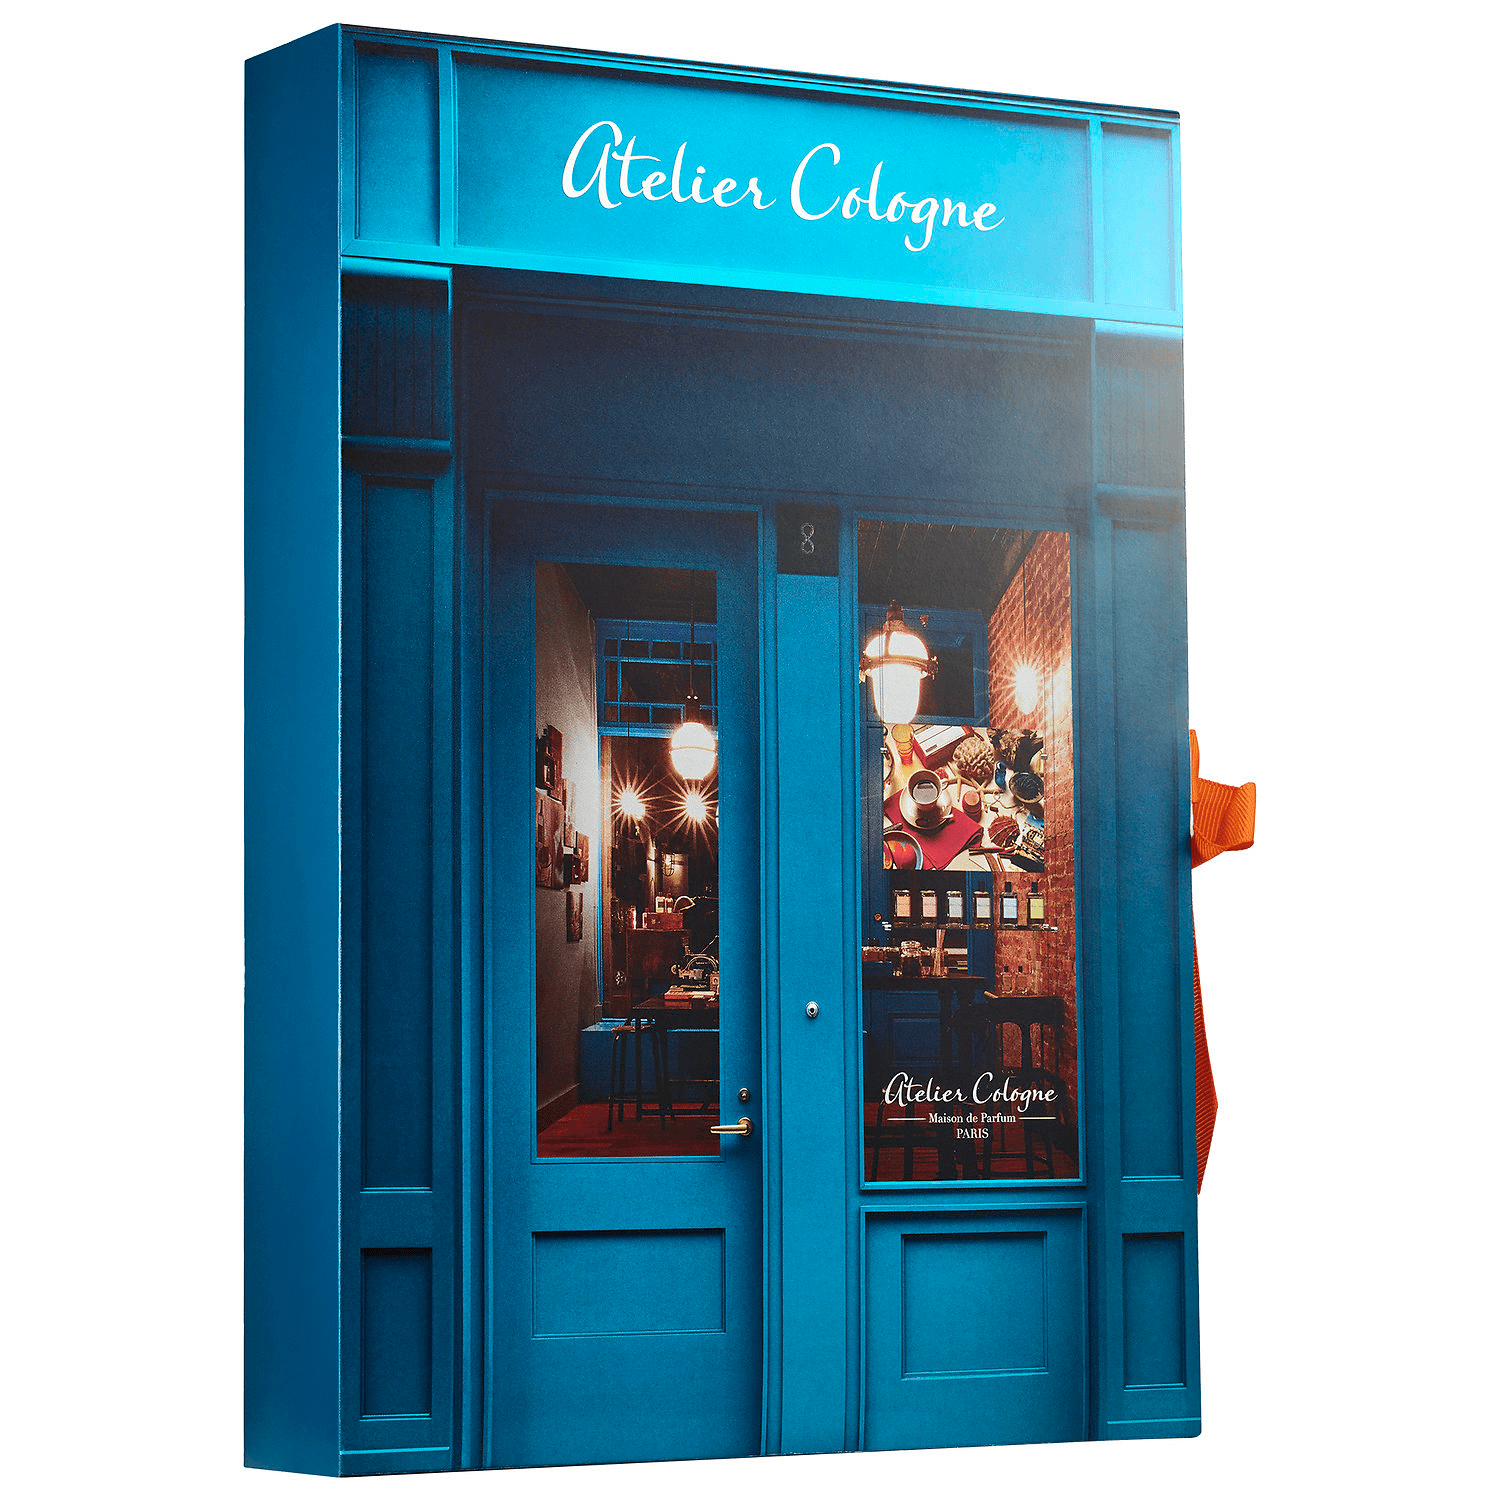 2017 Atelier Cologne Advent Calendar Available Now + Full Spoilers